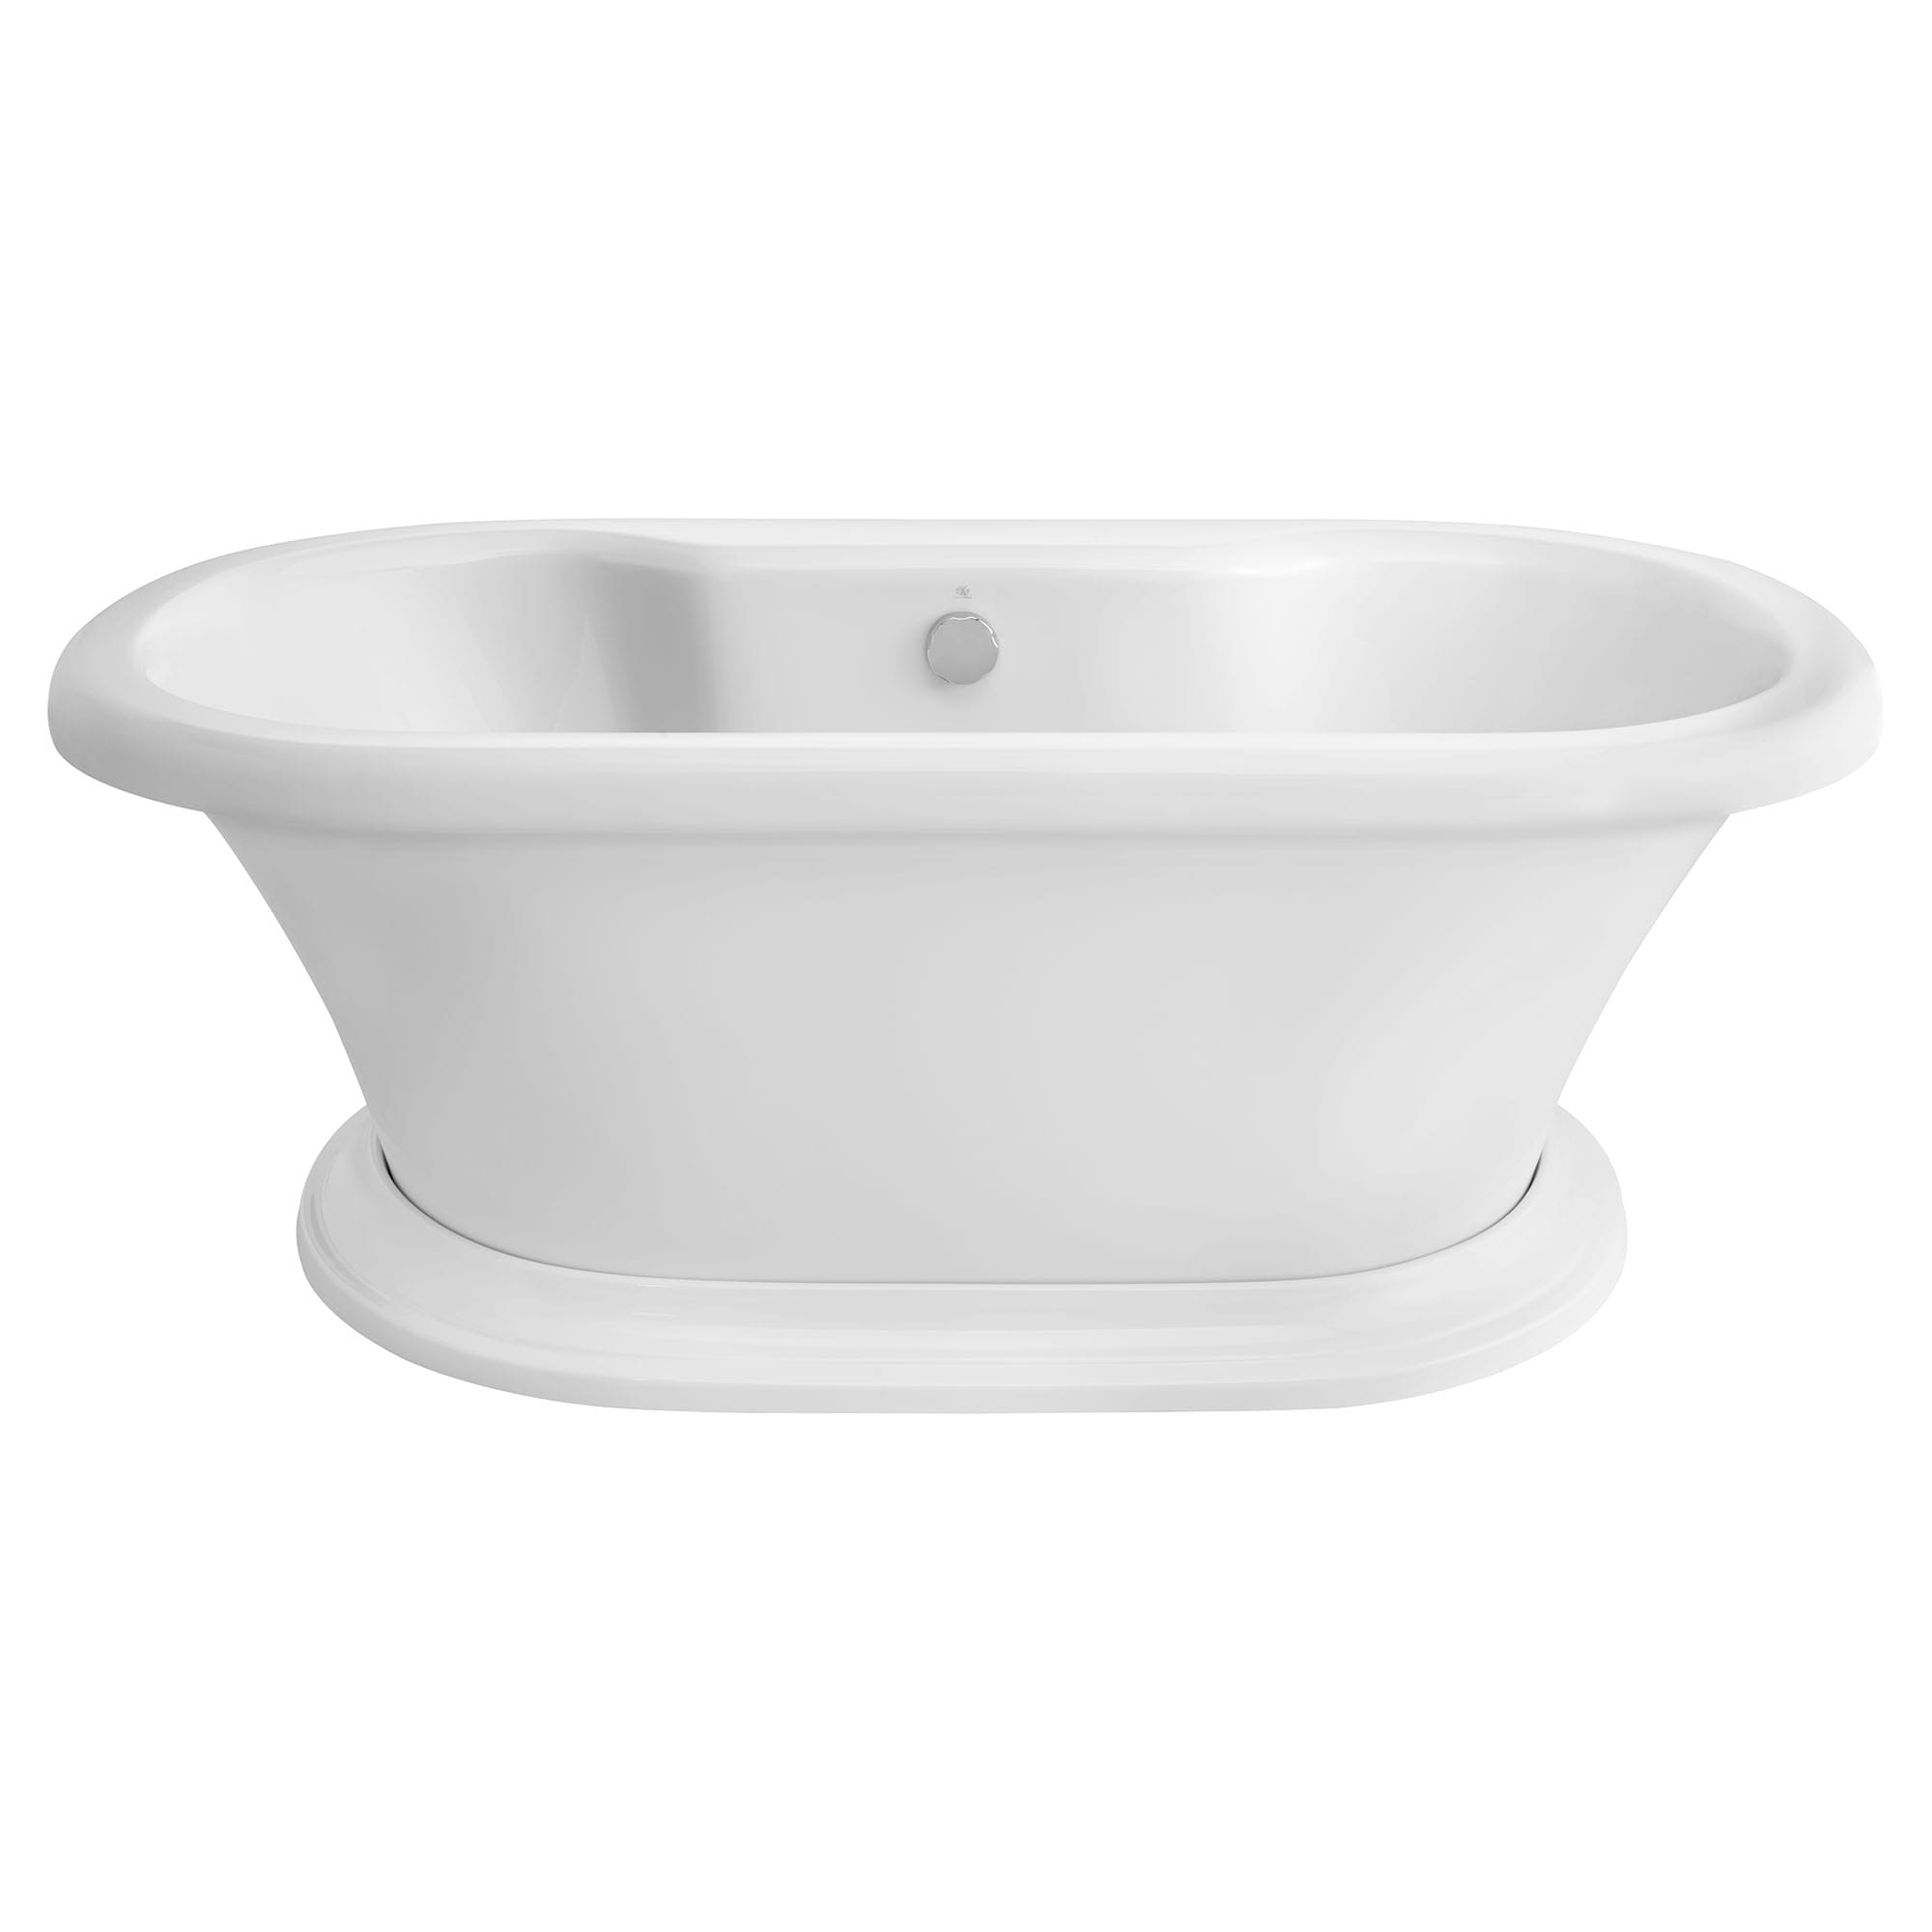 St. George Freestanding Soaking Tub With Deck